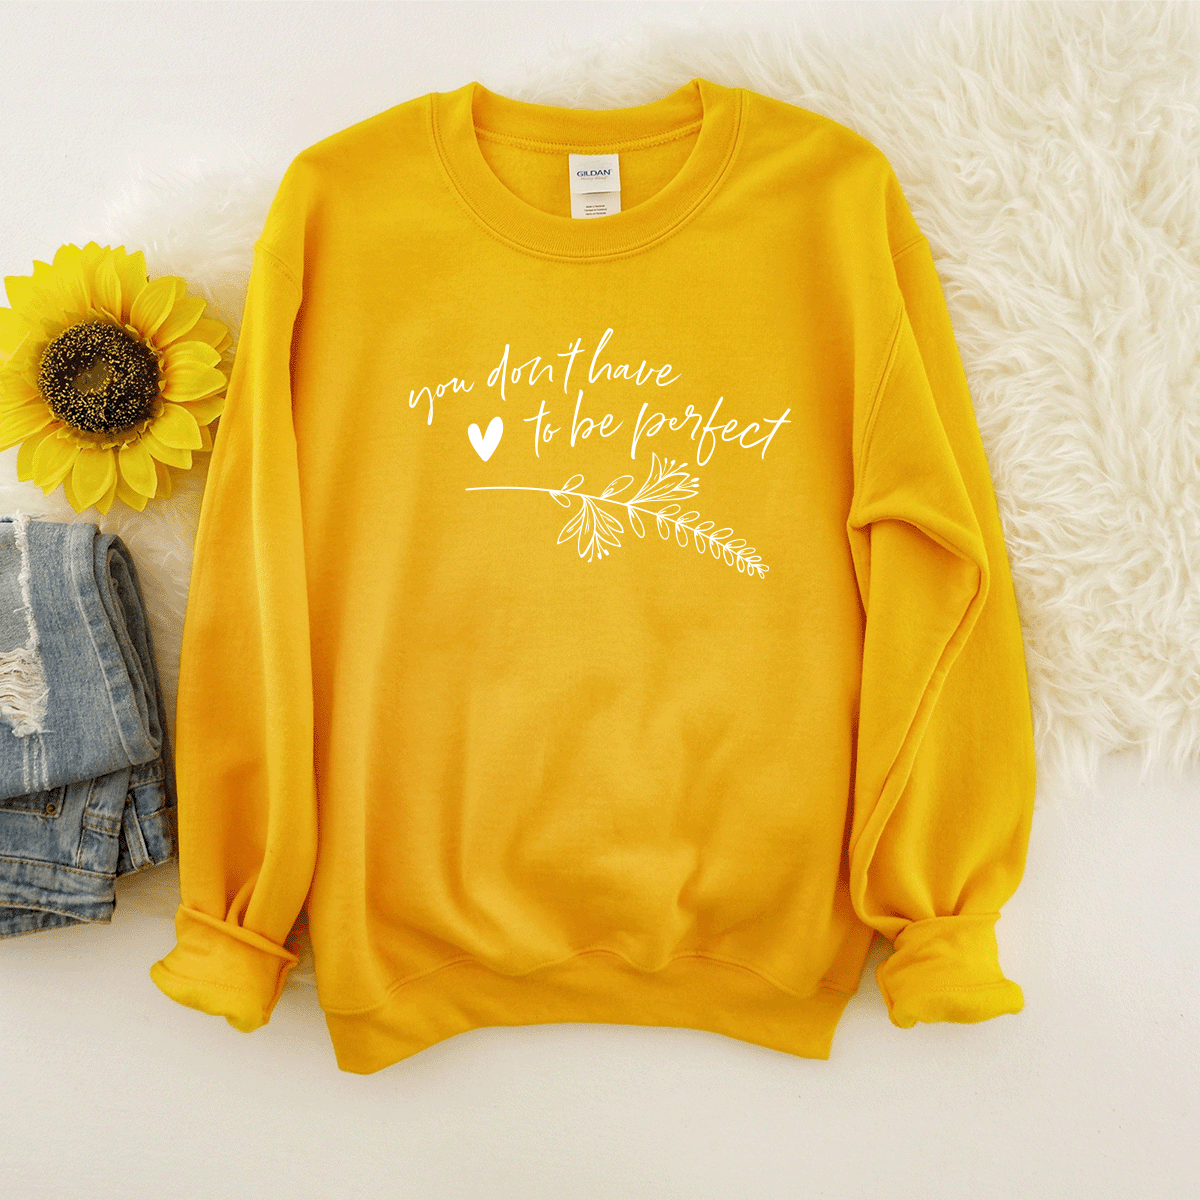 You Don't Have To Be Perfect - Sweatshirt